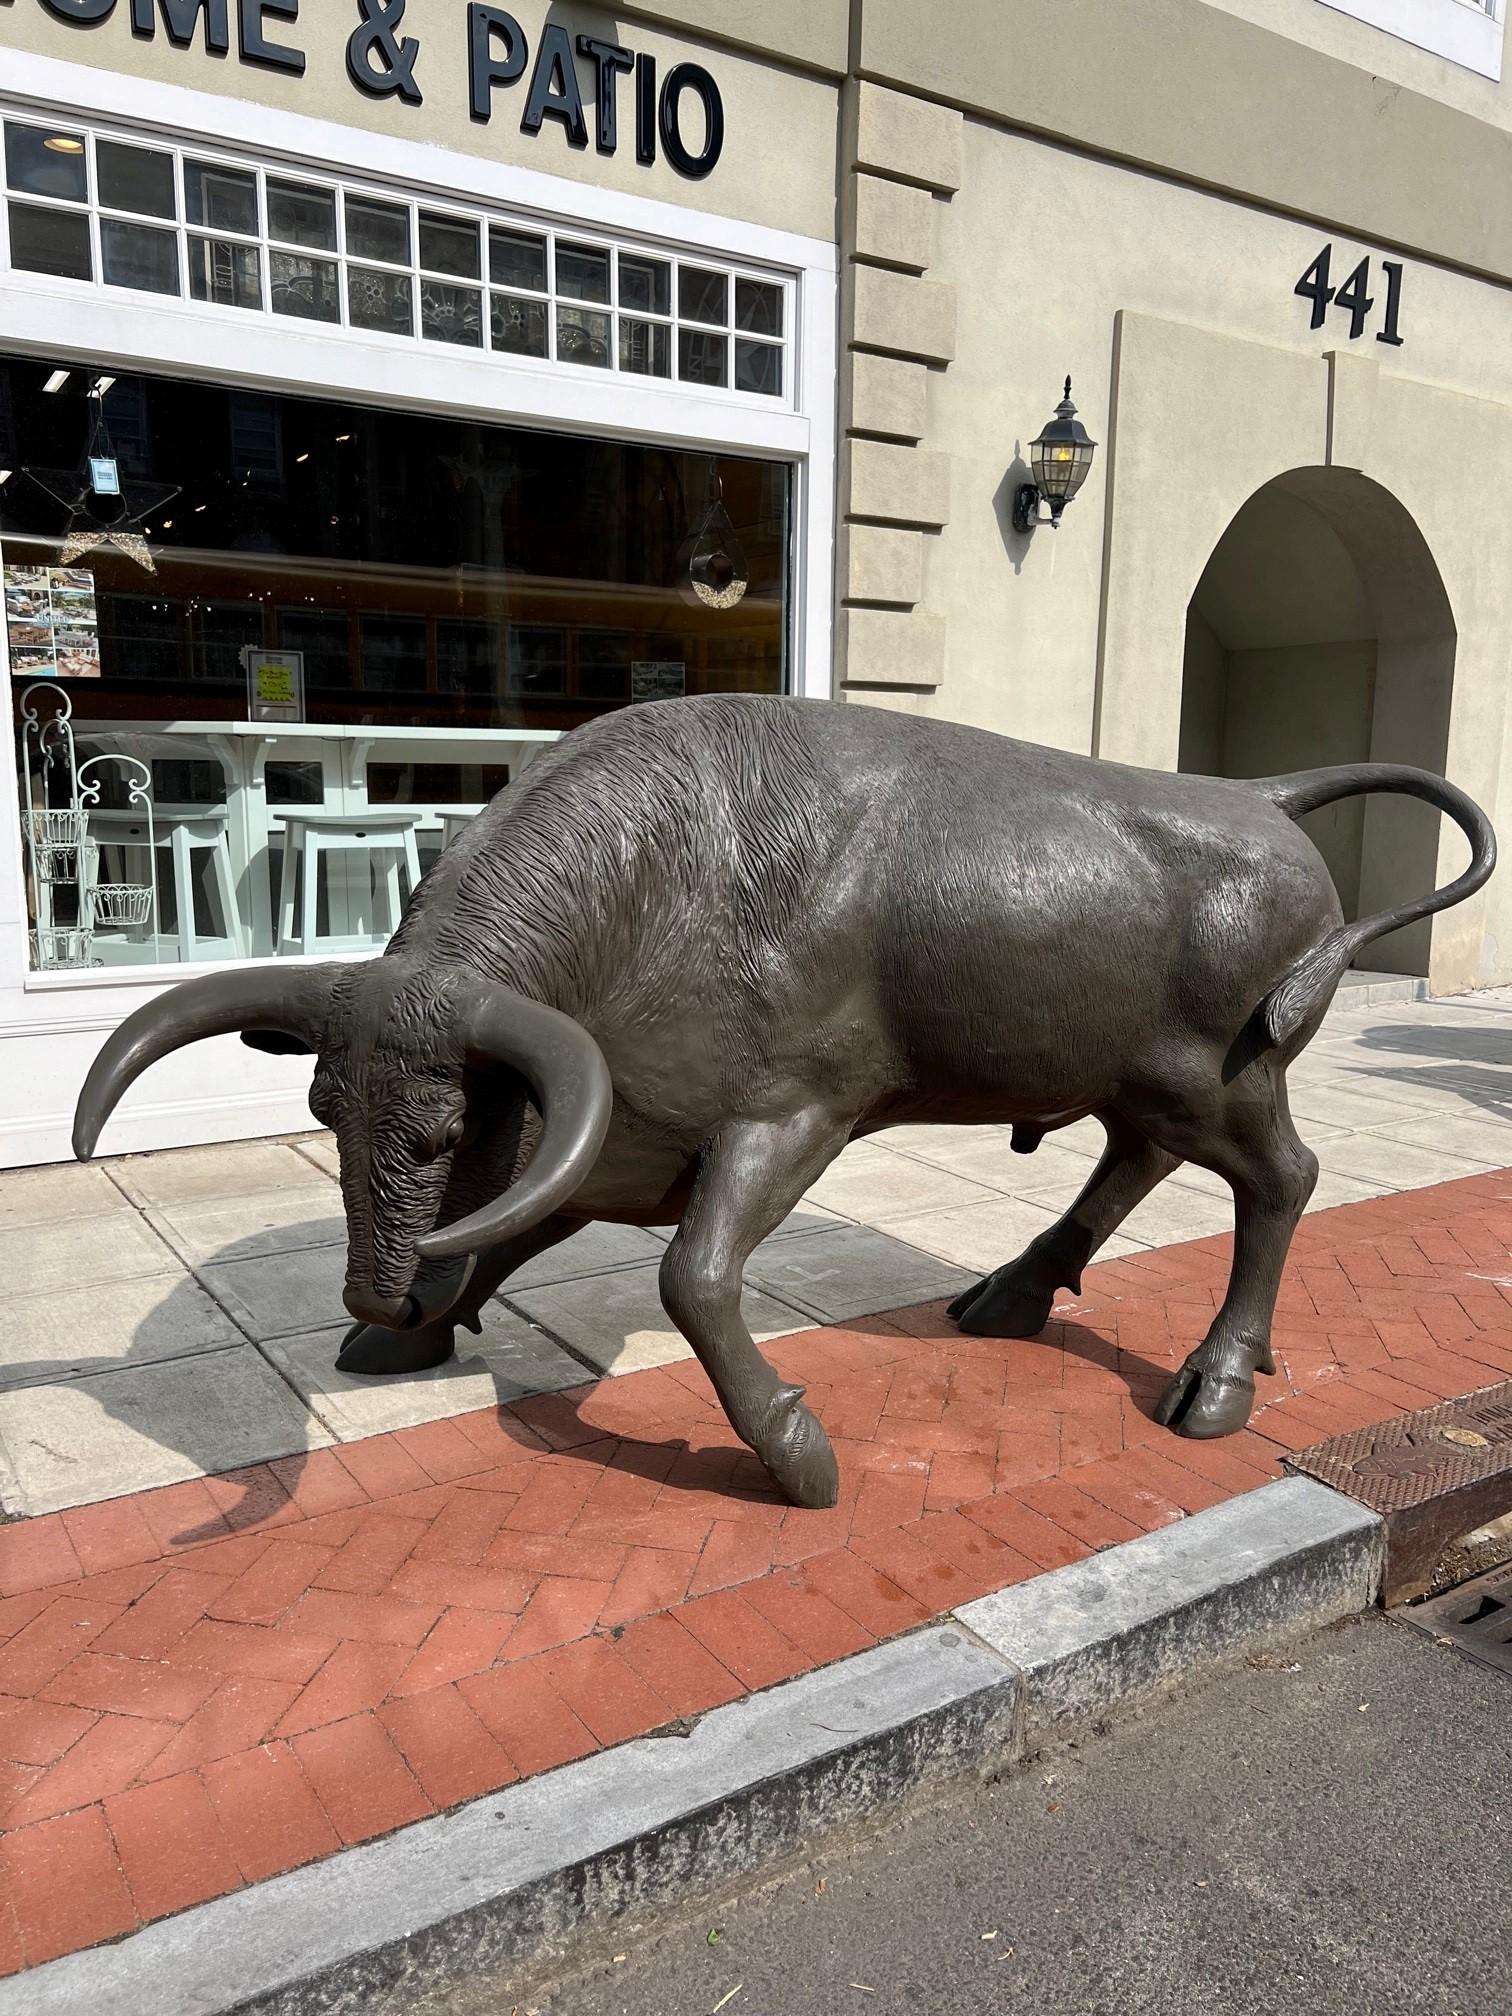 Life size fiberglass charging Bull statue. The charging Bull in finance represents optimism and growth. 
Native Americans believe a Bull represents wealth, potency, bravery and overall power. Made with a very sturdy and strong fiberglass, this Bull